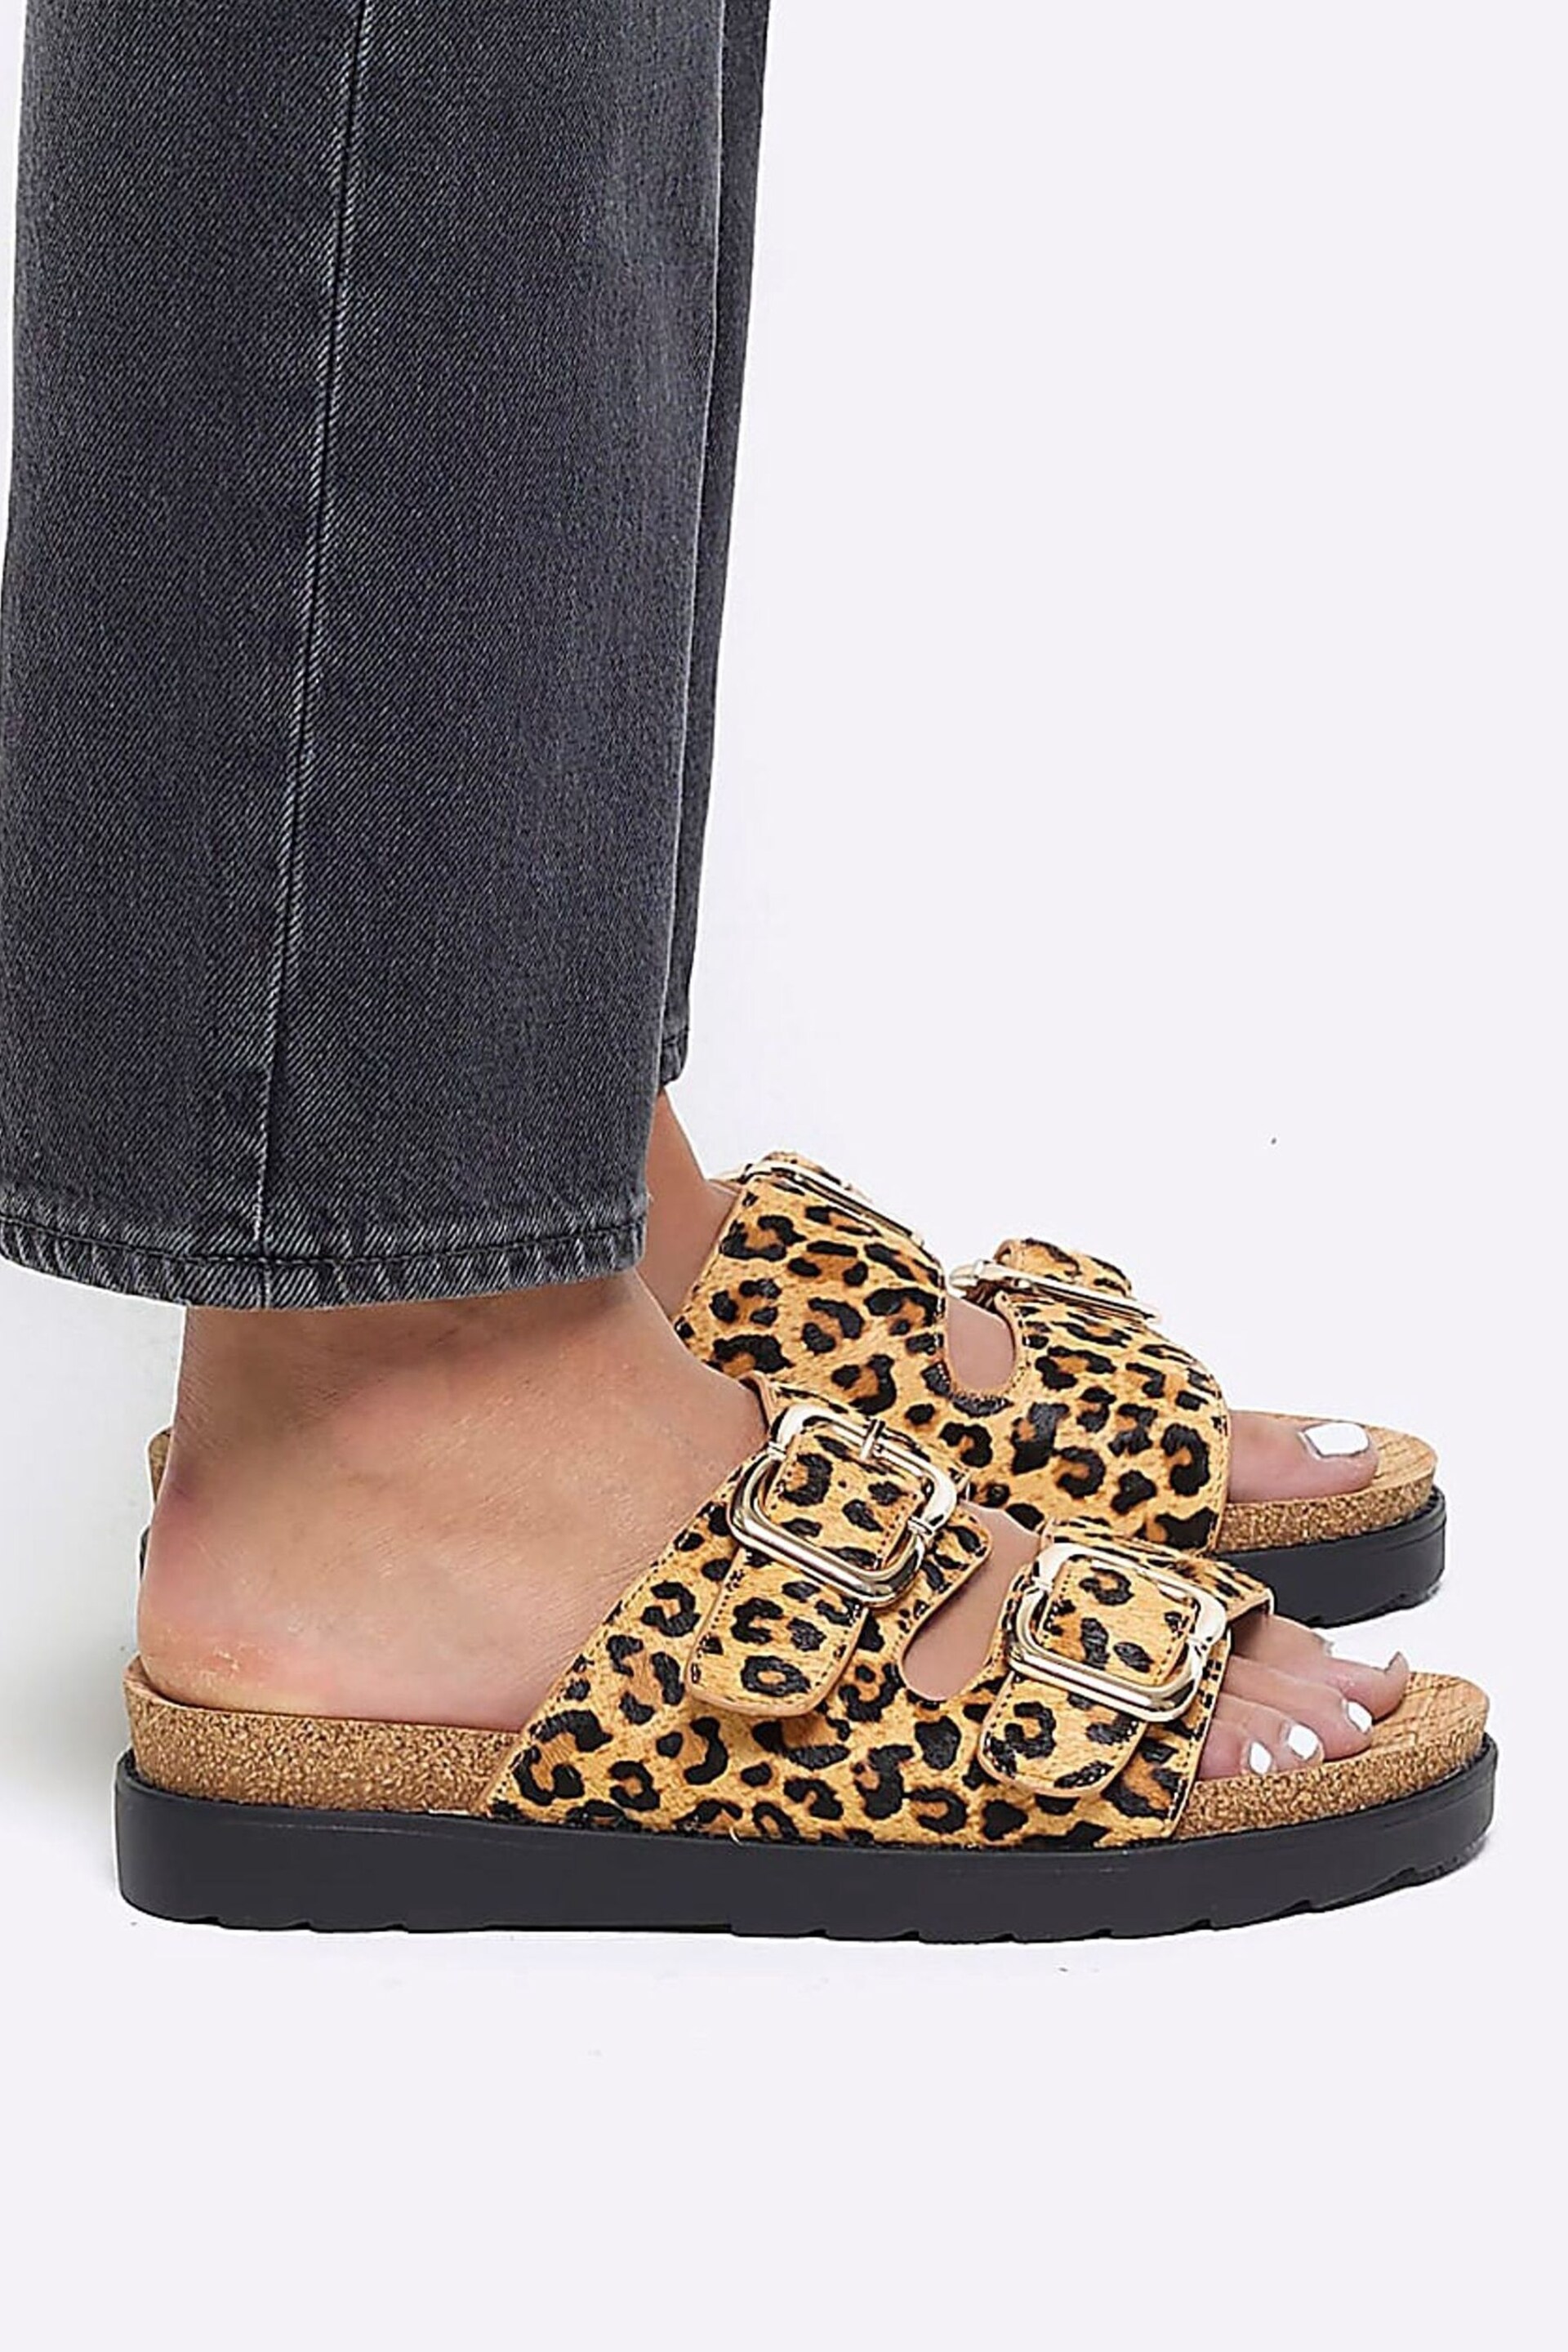 River Island Brown Leopard Double Buckle Sandals - Image 6 of 6